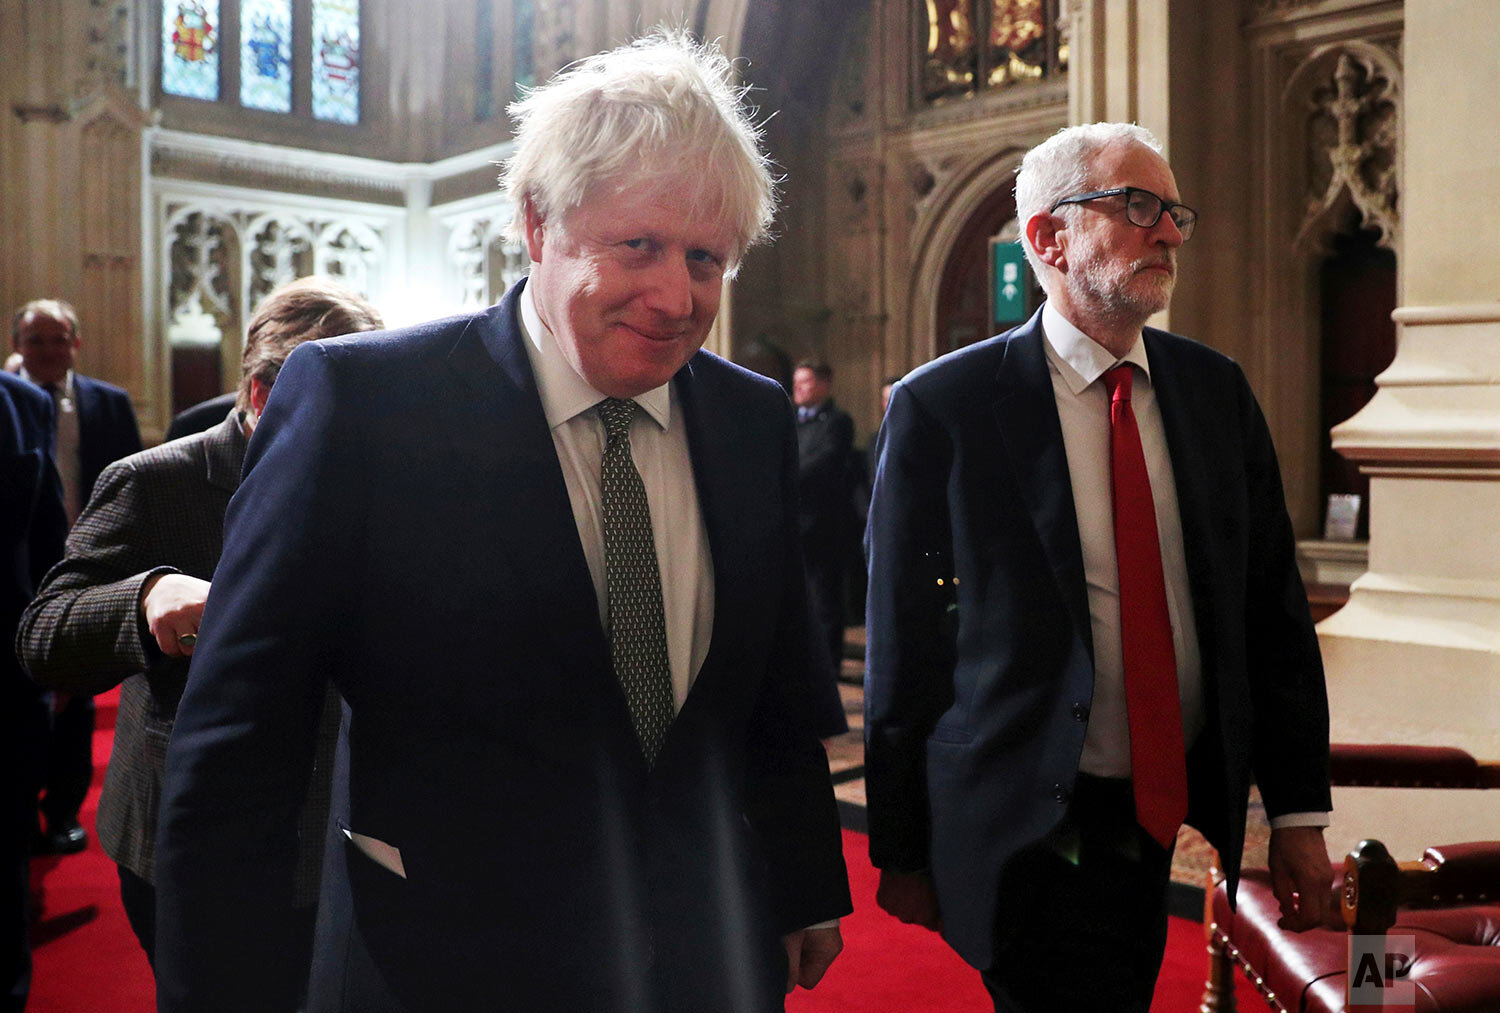  Prime Minister Boris Johnson, foreground, and Labour Party leader Jeremy Corbyn arrive for the State Opening of Parliament at the Houses of Parliament in London, Thursday, Dec. 19, 2019. Britain's Queen Elizabeth II formally opened a new session of 